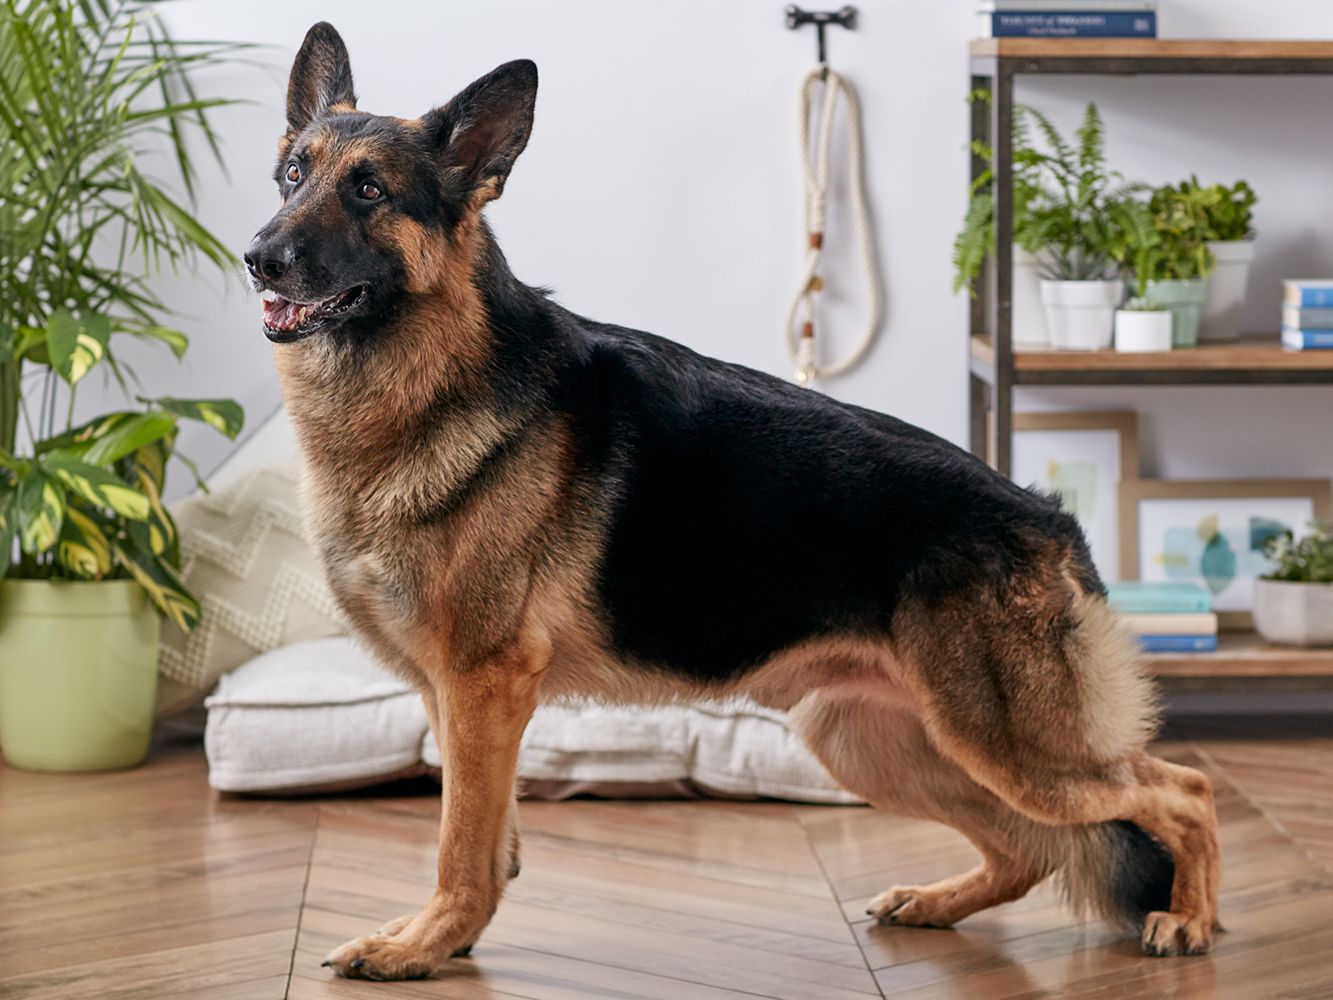 What kind of vegetables do German shepherds consume?